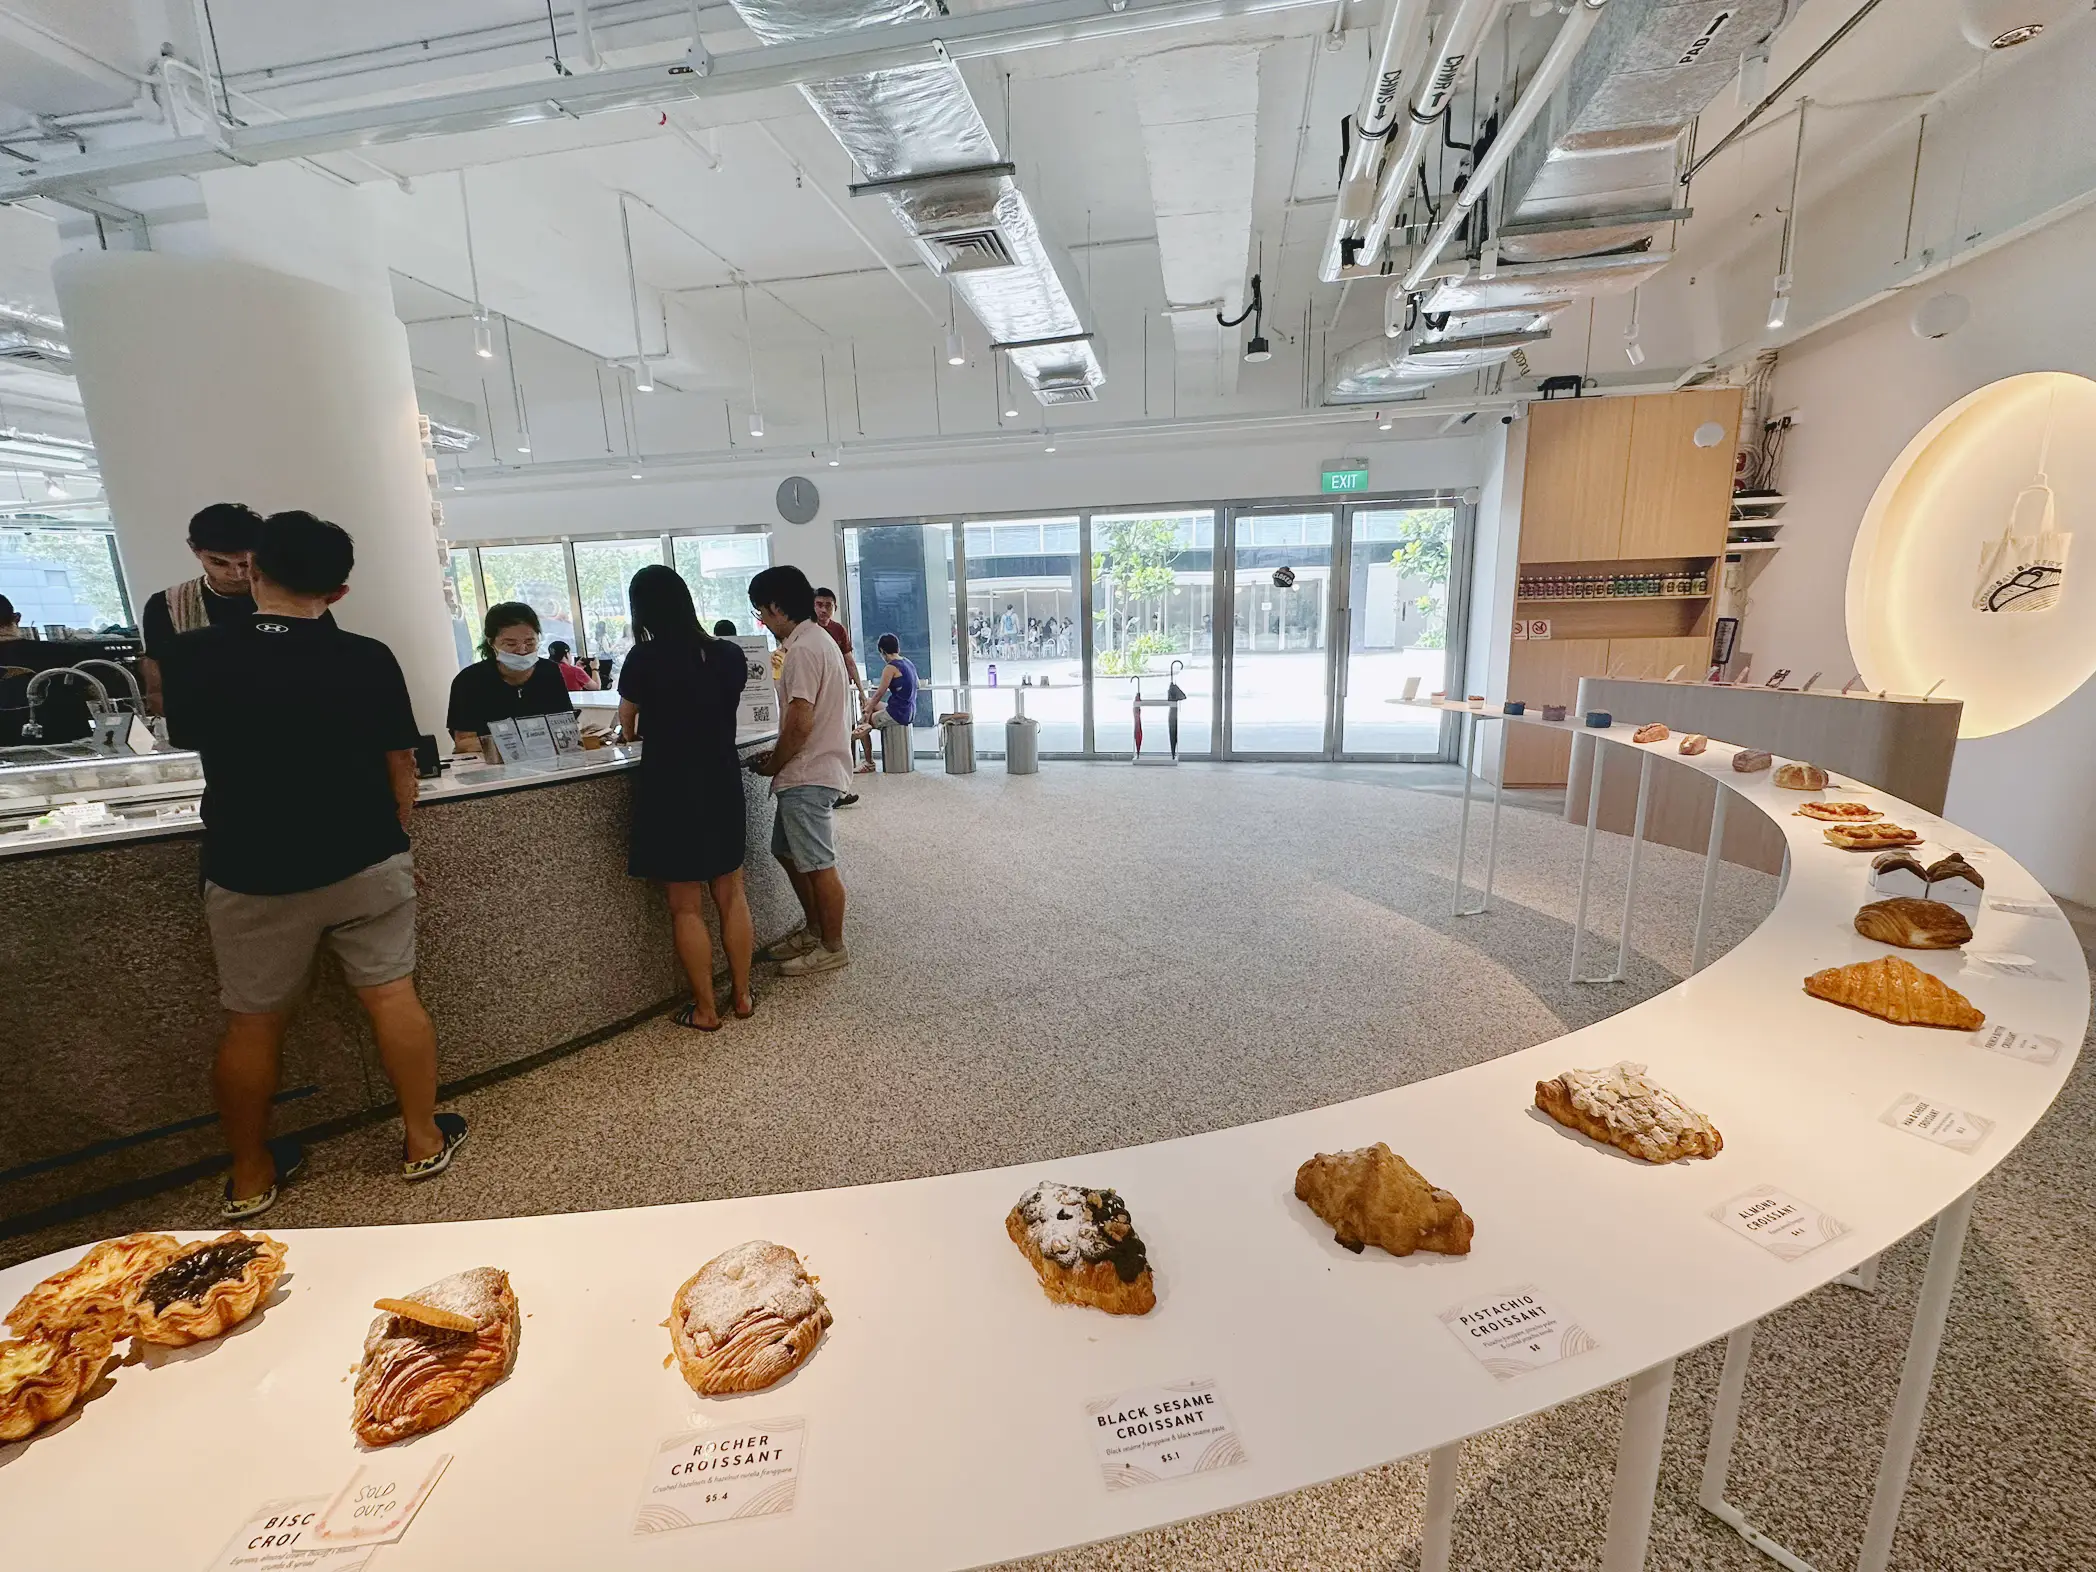 LOOK: This Hong Kong 'mall' is a must-visit for its droolworthy design